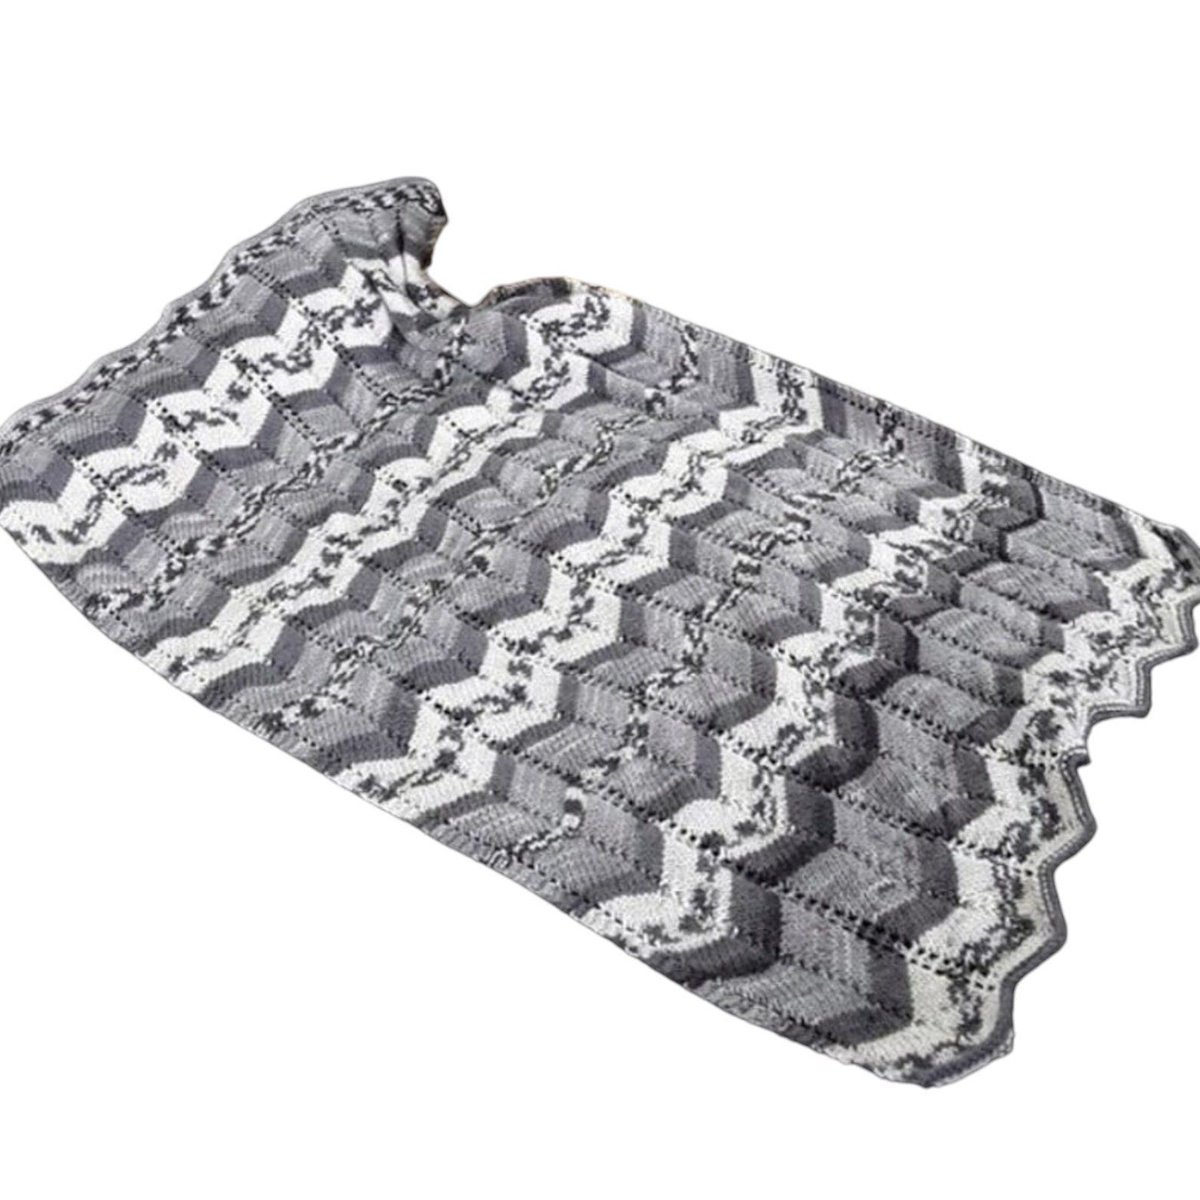 Discover this charming grey chevron hand-knit baby pram blanket on #Etsy! It's a delightful accessory to keep your baby warm. Shop now: knittingtopia.etsy.com/listing/167945… #knittingtopia #babyblanket #handknits #handmade #craftbizparty #MHHSBD #babyessentials